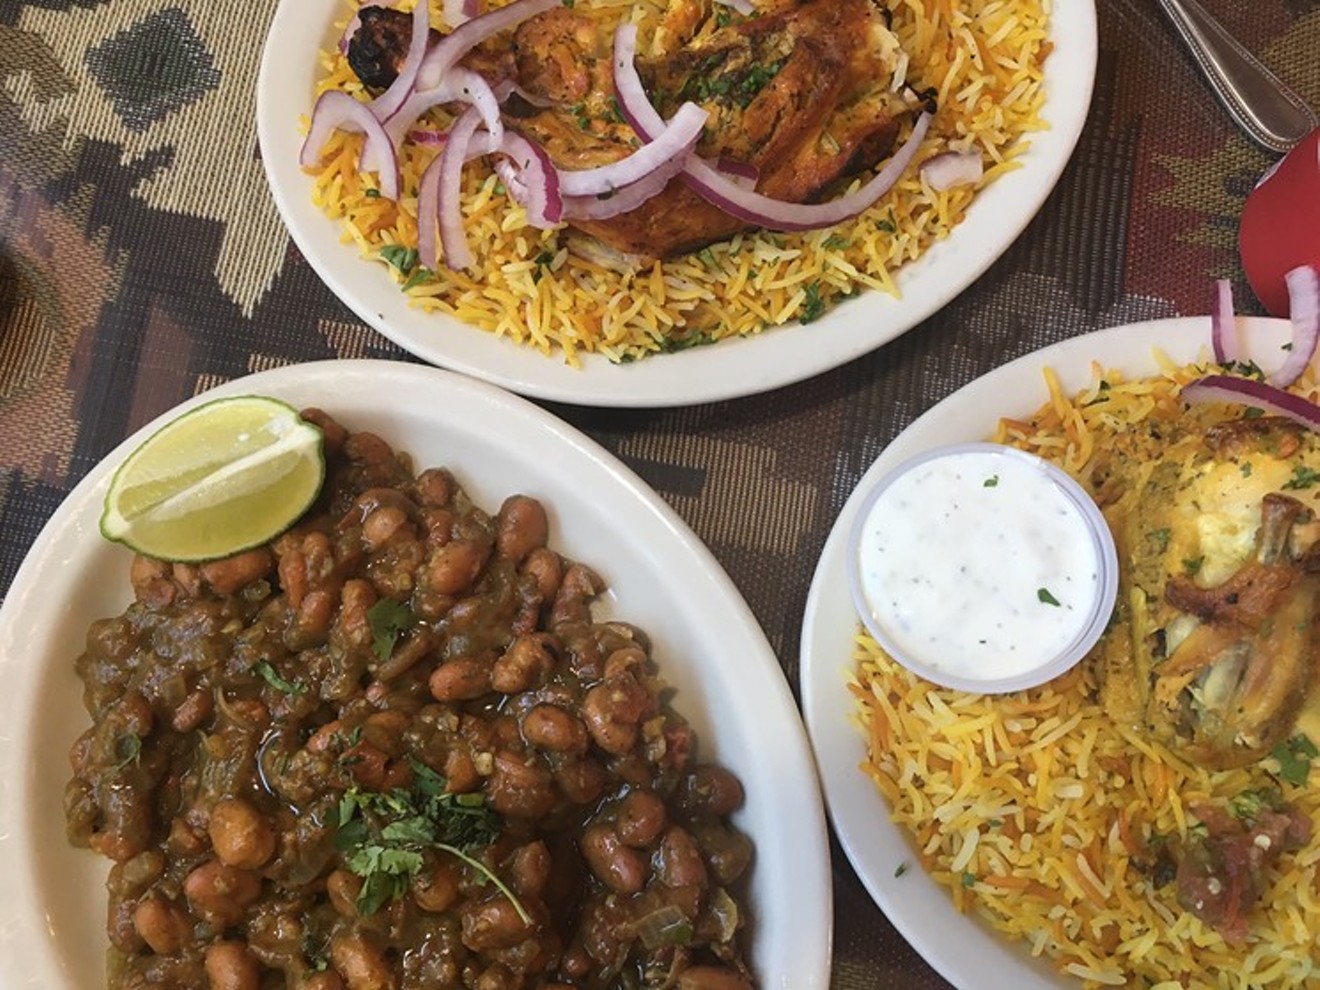 Yemeni rice and beans will make you see Middle Eastern food from a new angle.